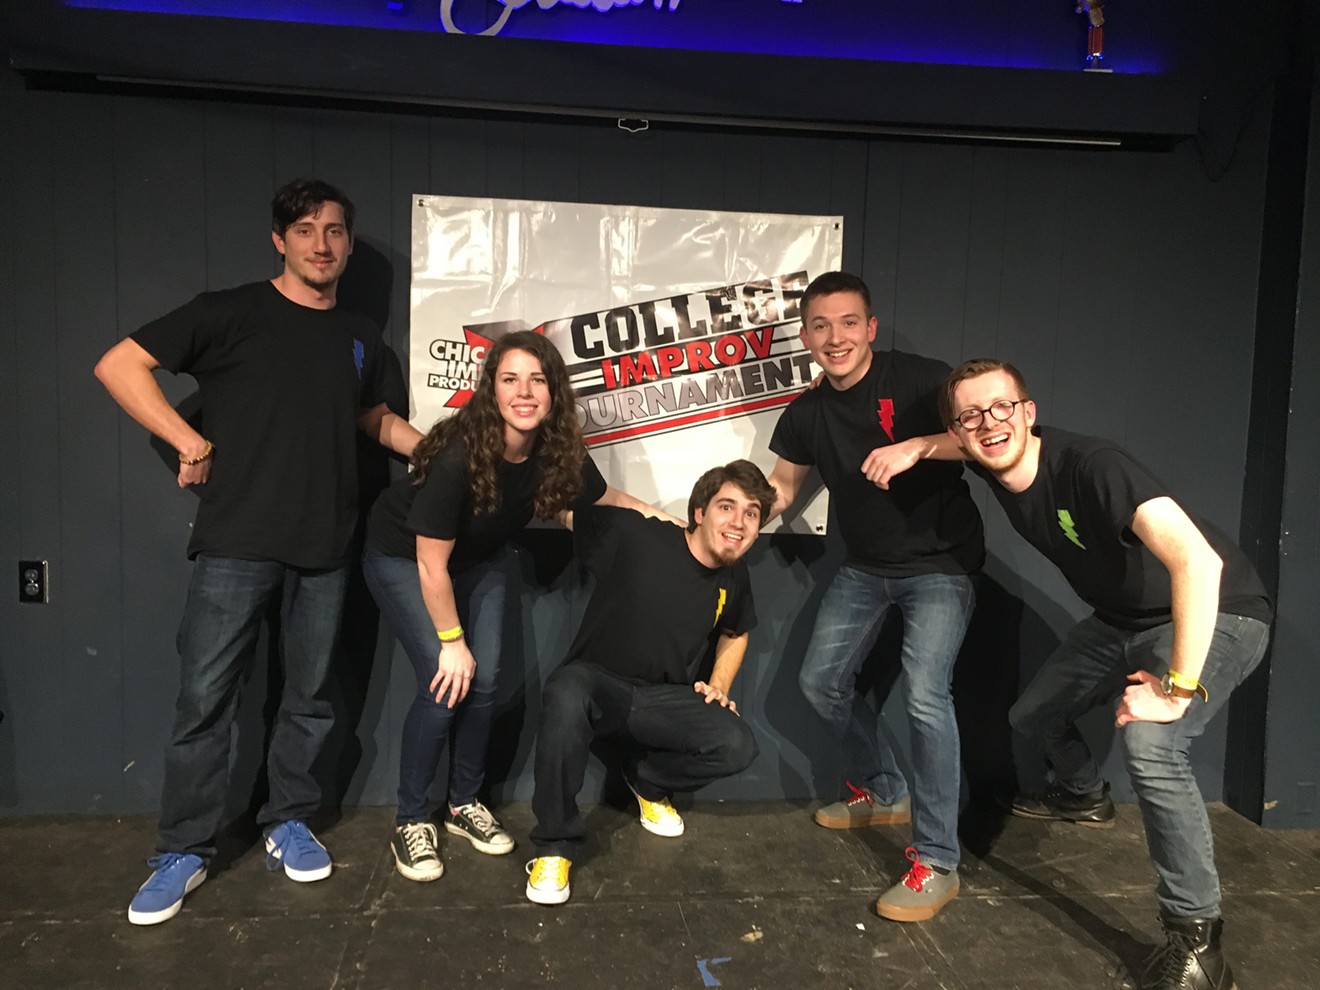 University of North Texas students (from left) Alex Wiggins, Tierney Conley, Christian Campbell, Nathan Lawrence and Sean Byrne make up the UNT Improv comedy troupe Sparky. The group is headed to Chicago next month to compete in the 11th annual national College Improv Tournament.